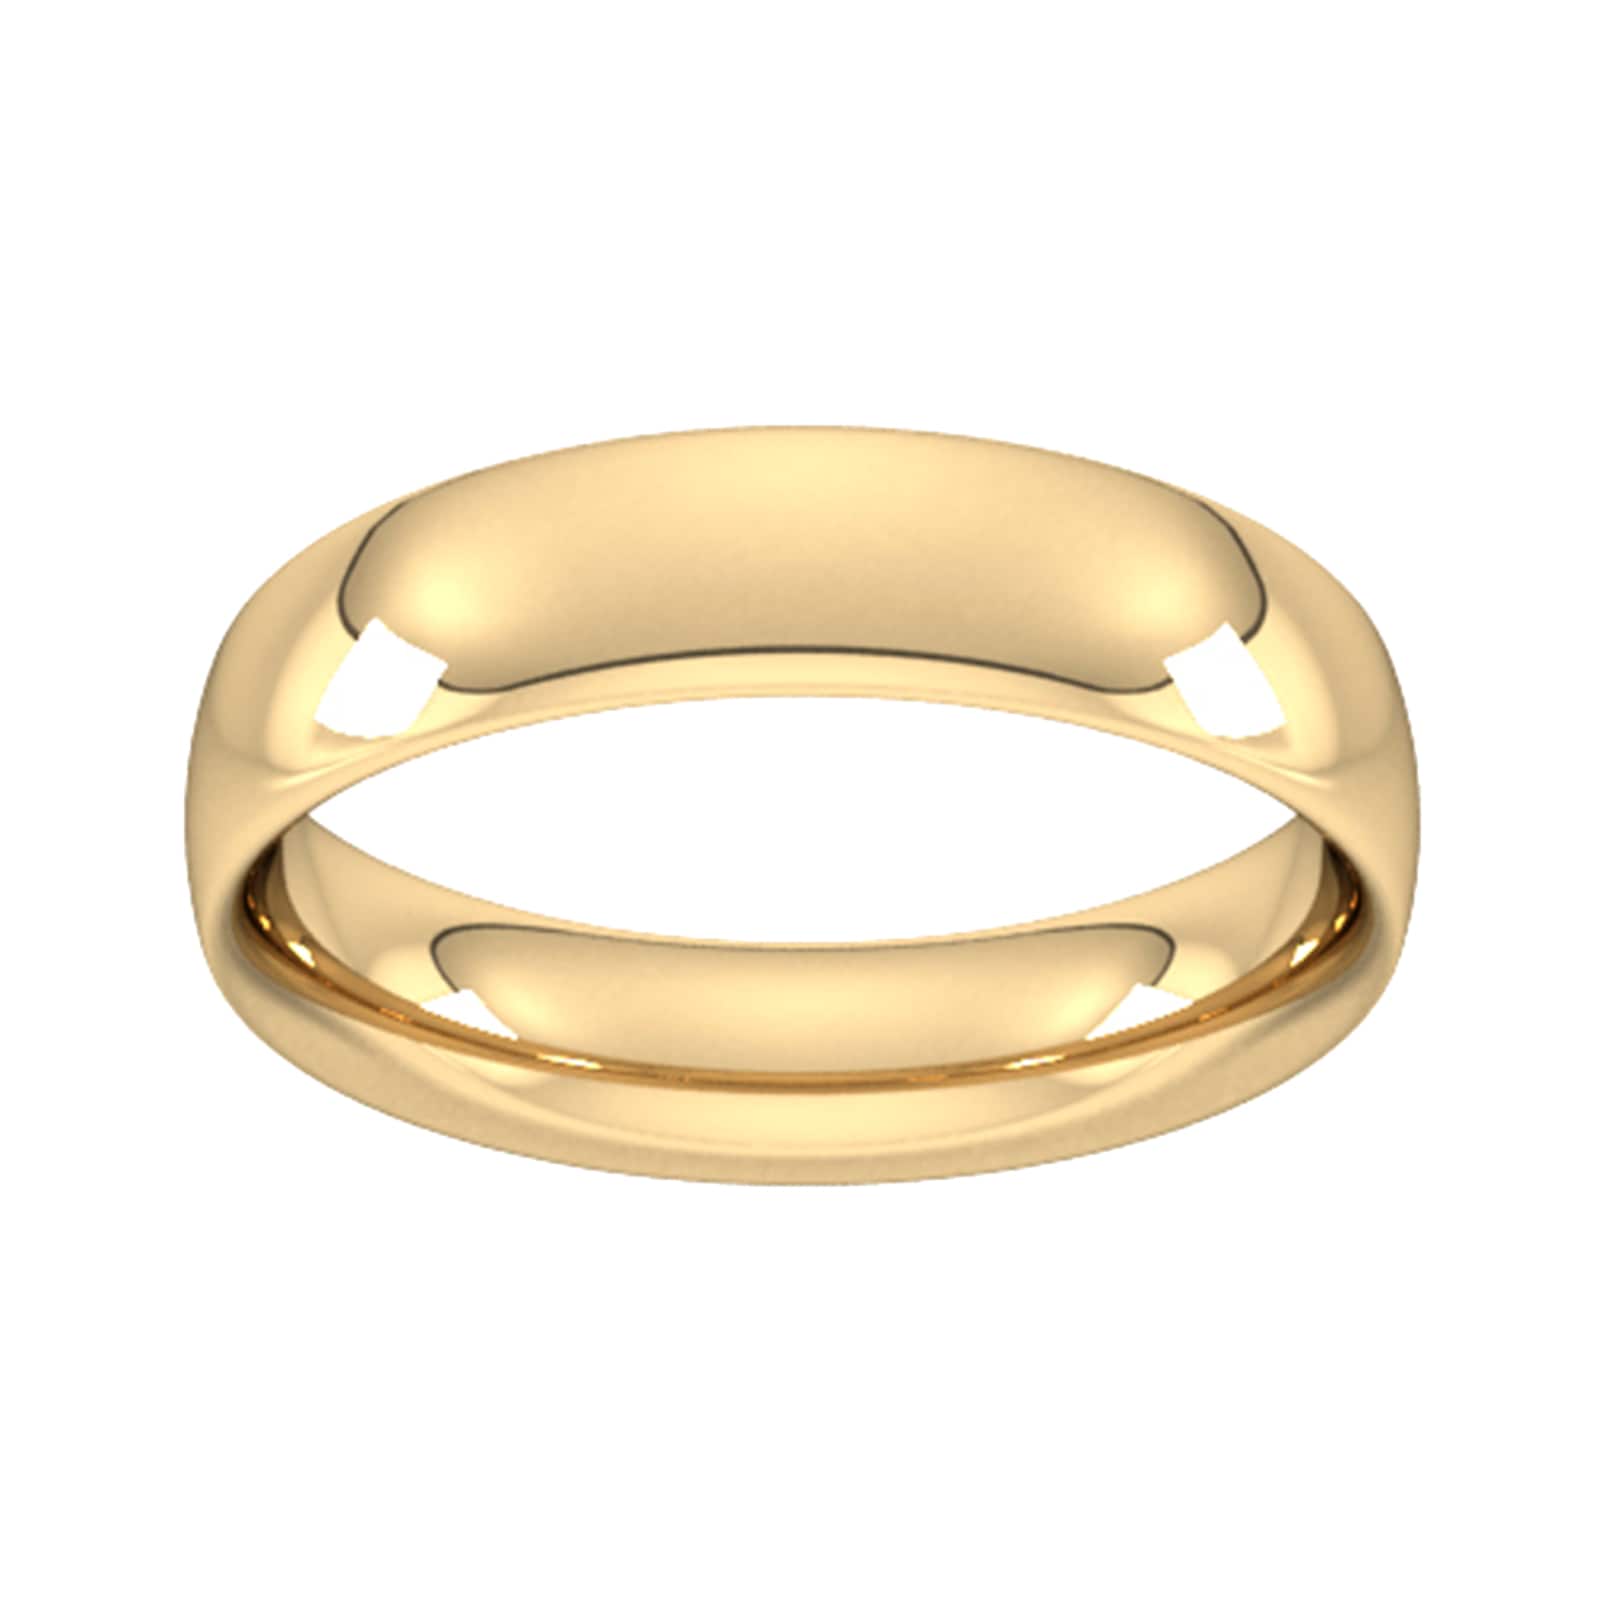 5mm Traditional Court Heavy Wedding Ring In 9 Carat Yellow Gold - Ring Size Z